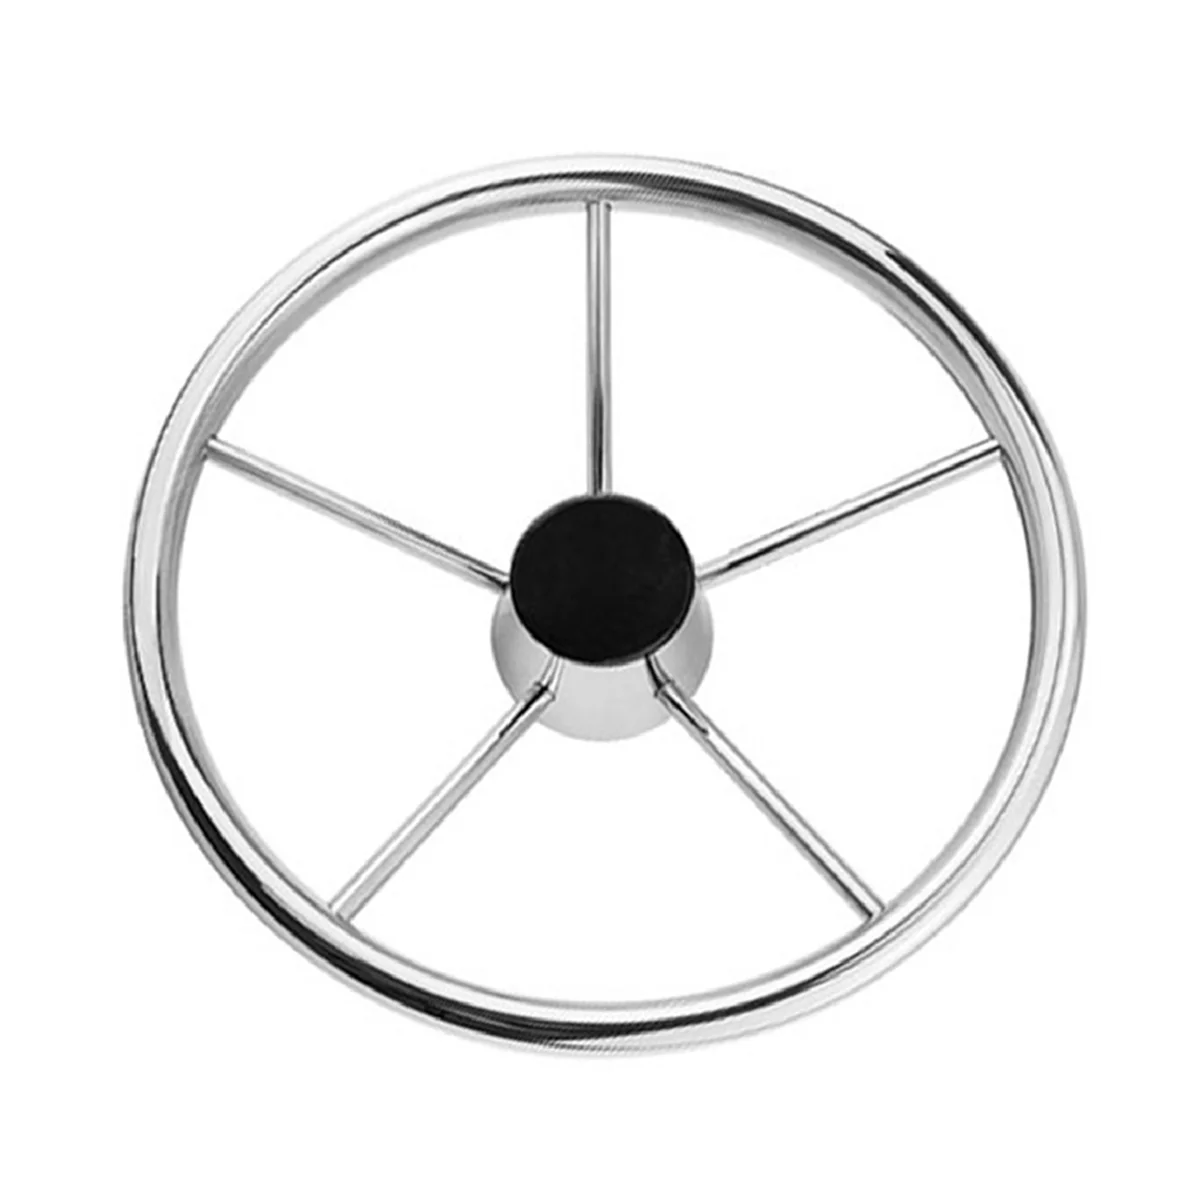 

Boat Steering Wheel Stainless Steel 5 Spoke 13.5Inch for Most Marine Yacht Boat Boating Equipment Accessories